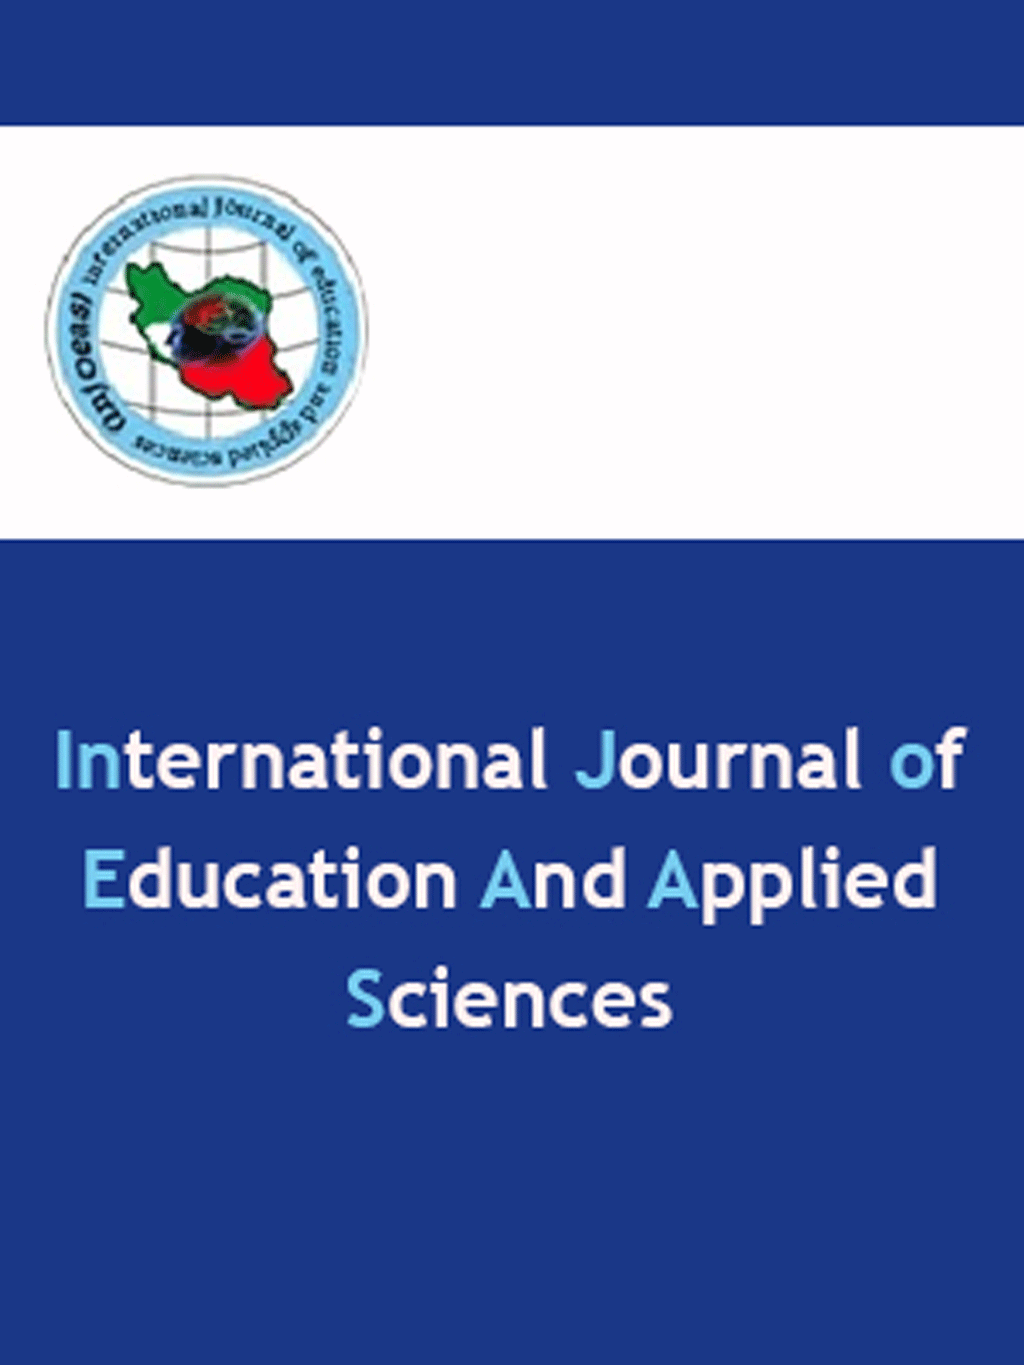 Education and Applied Sciences - April 2022, Volume 3 - Number 1